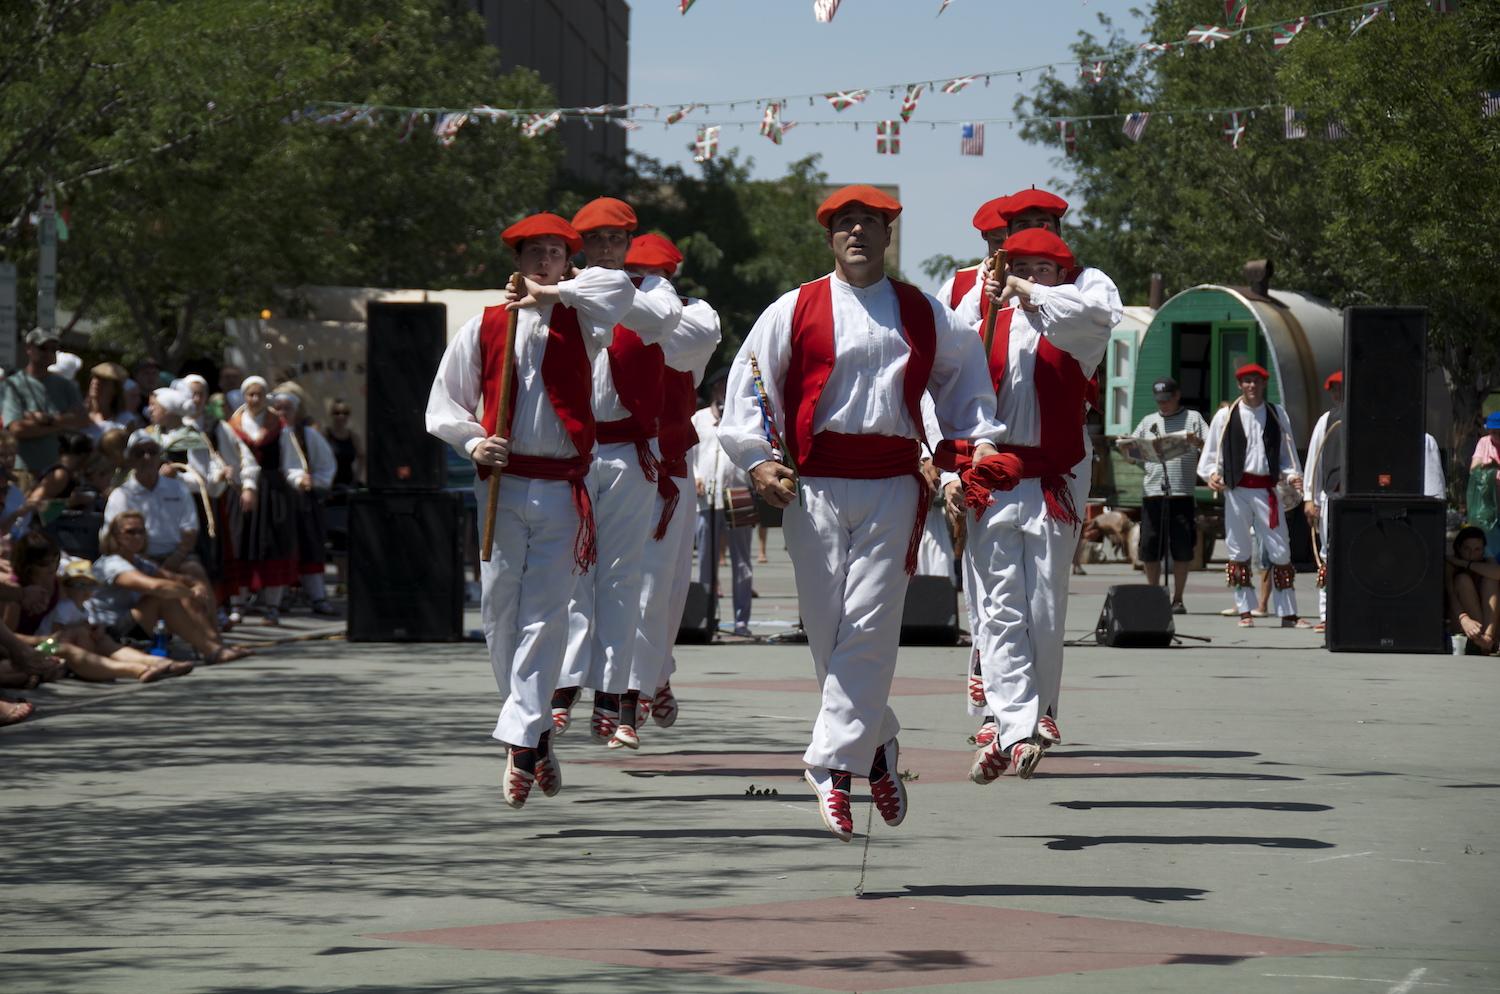 Experience Basque Culture at the San Inazio Festival in Boise. Edible